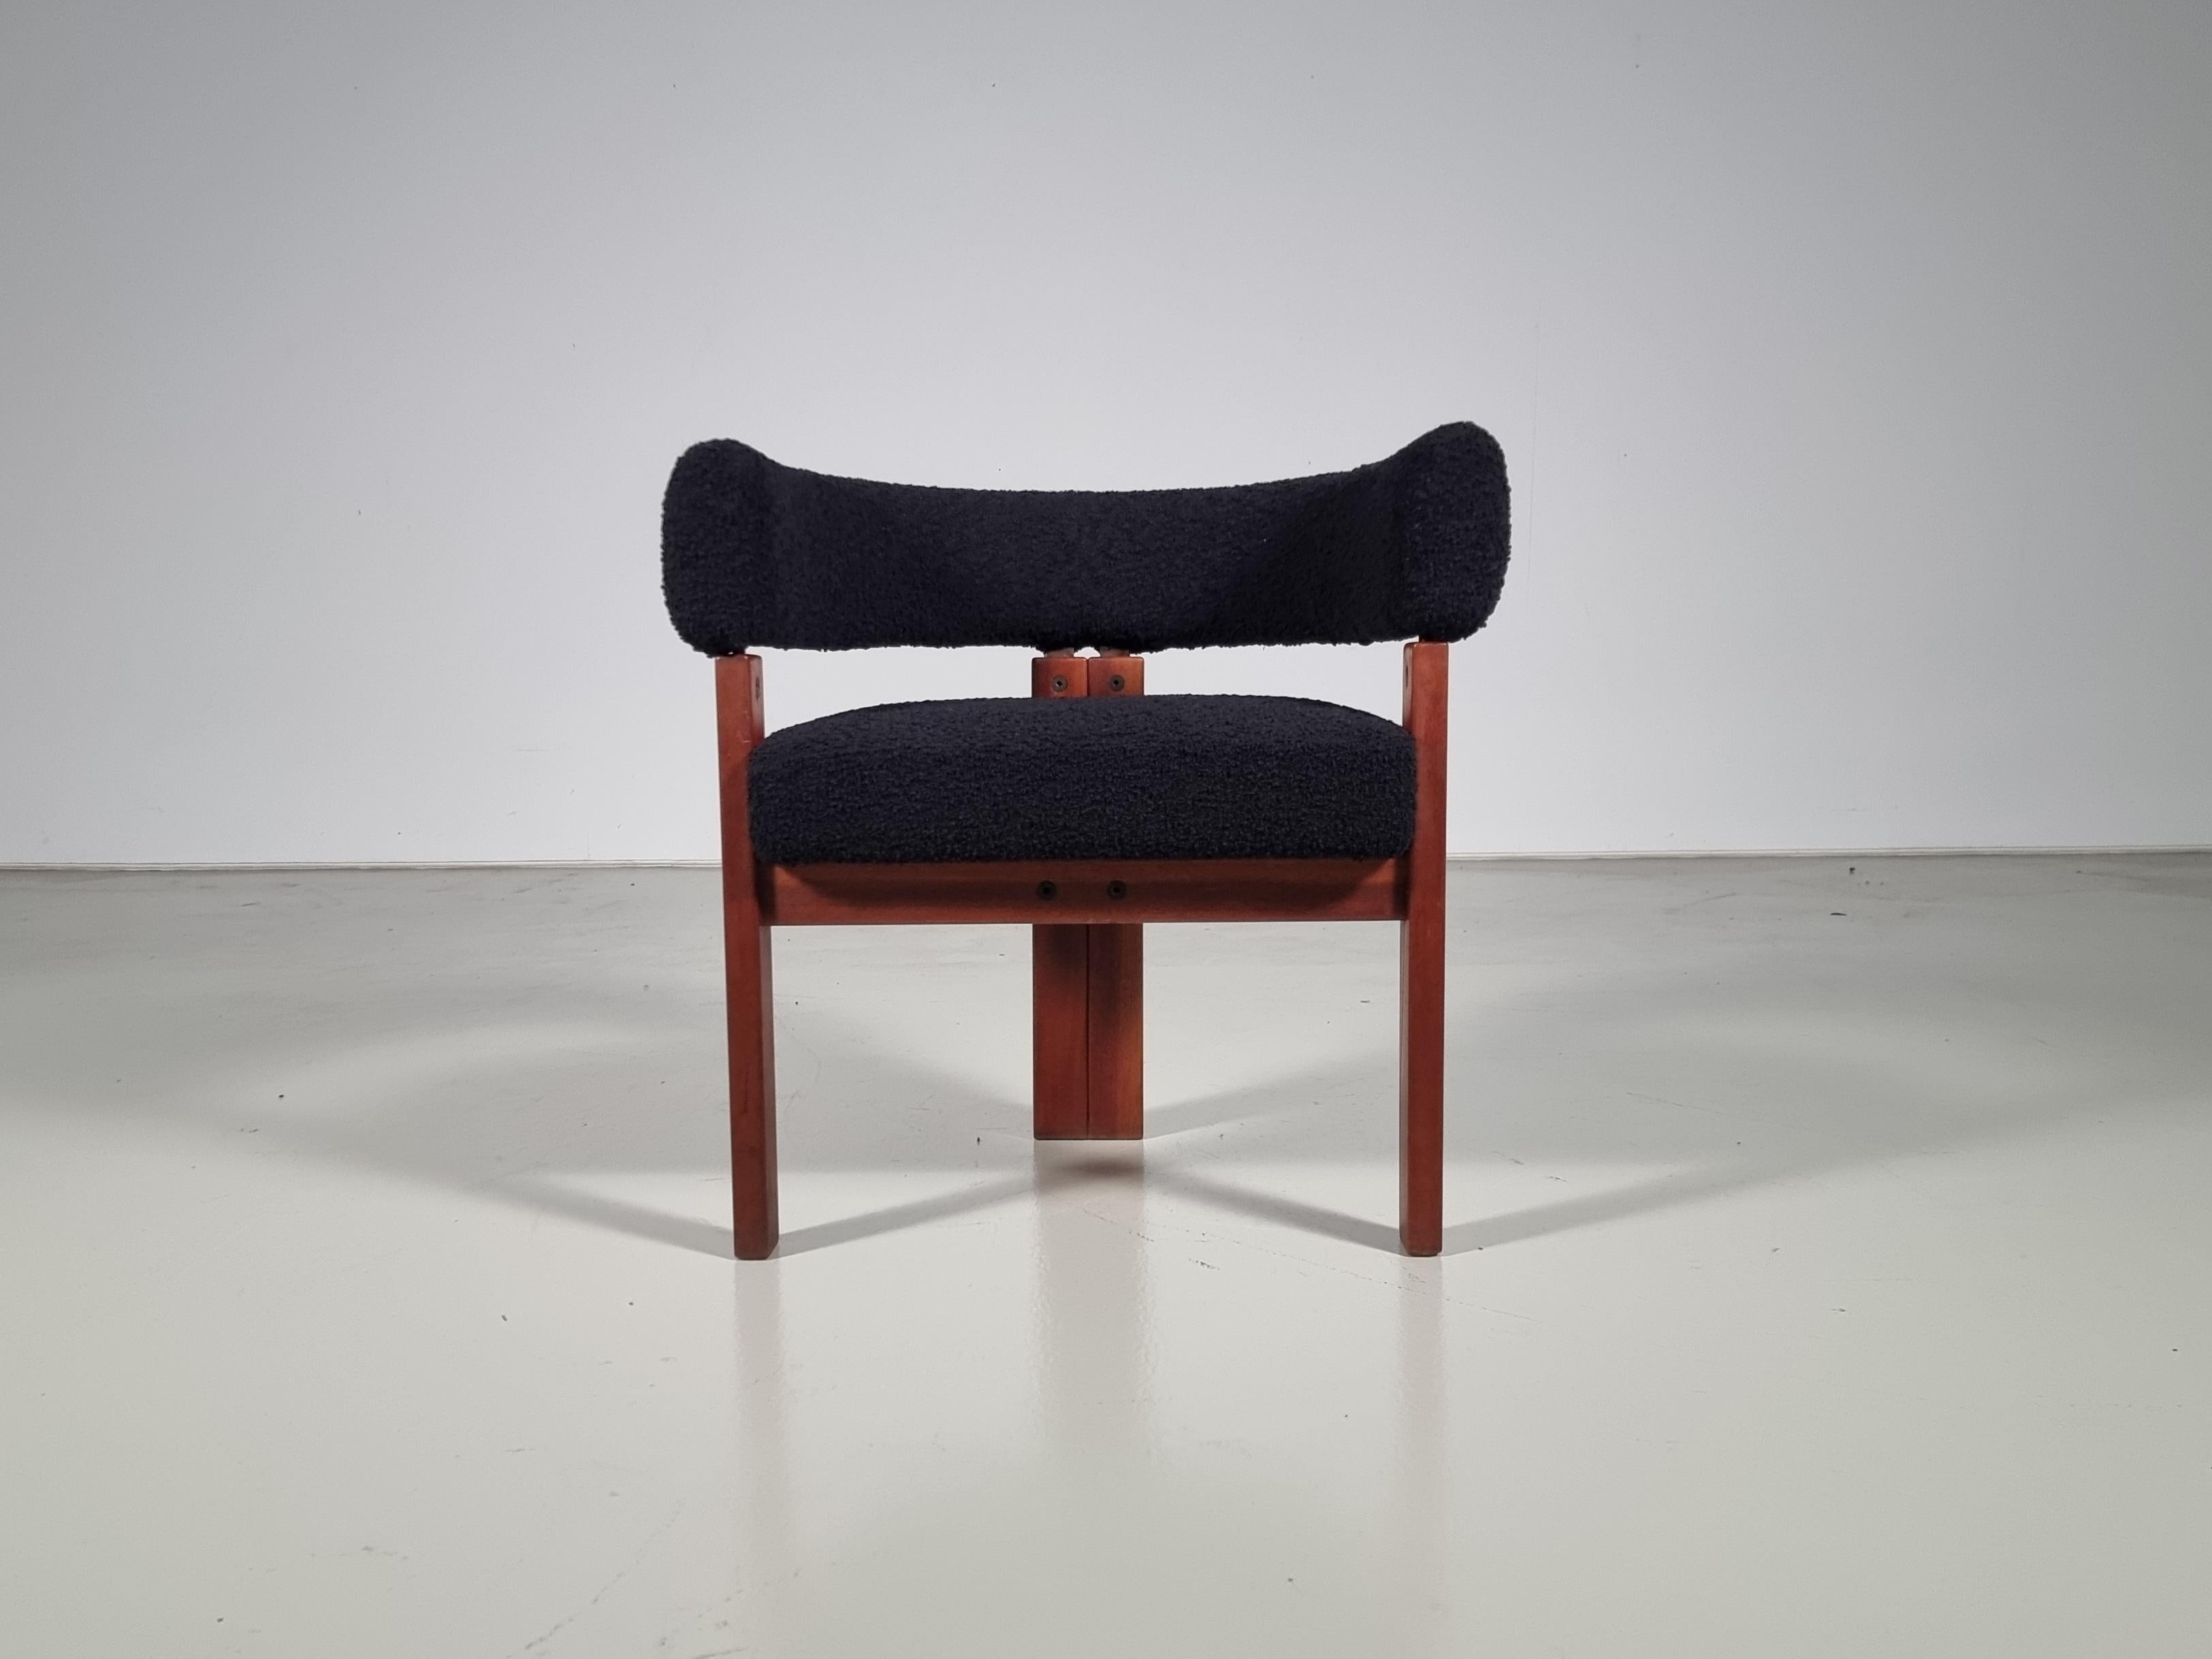 European Set of 8 Chairs in teak and black boucle by Ettore Sottsass for Poltronova, 1960 For Sale